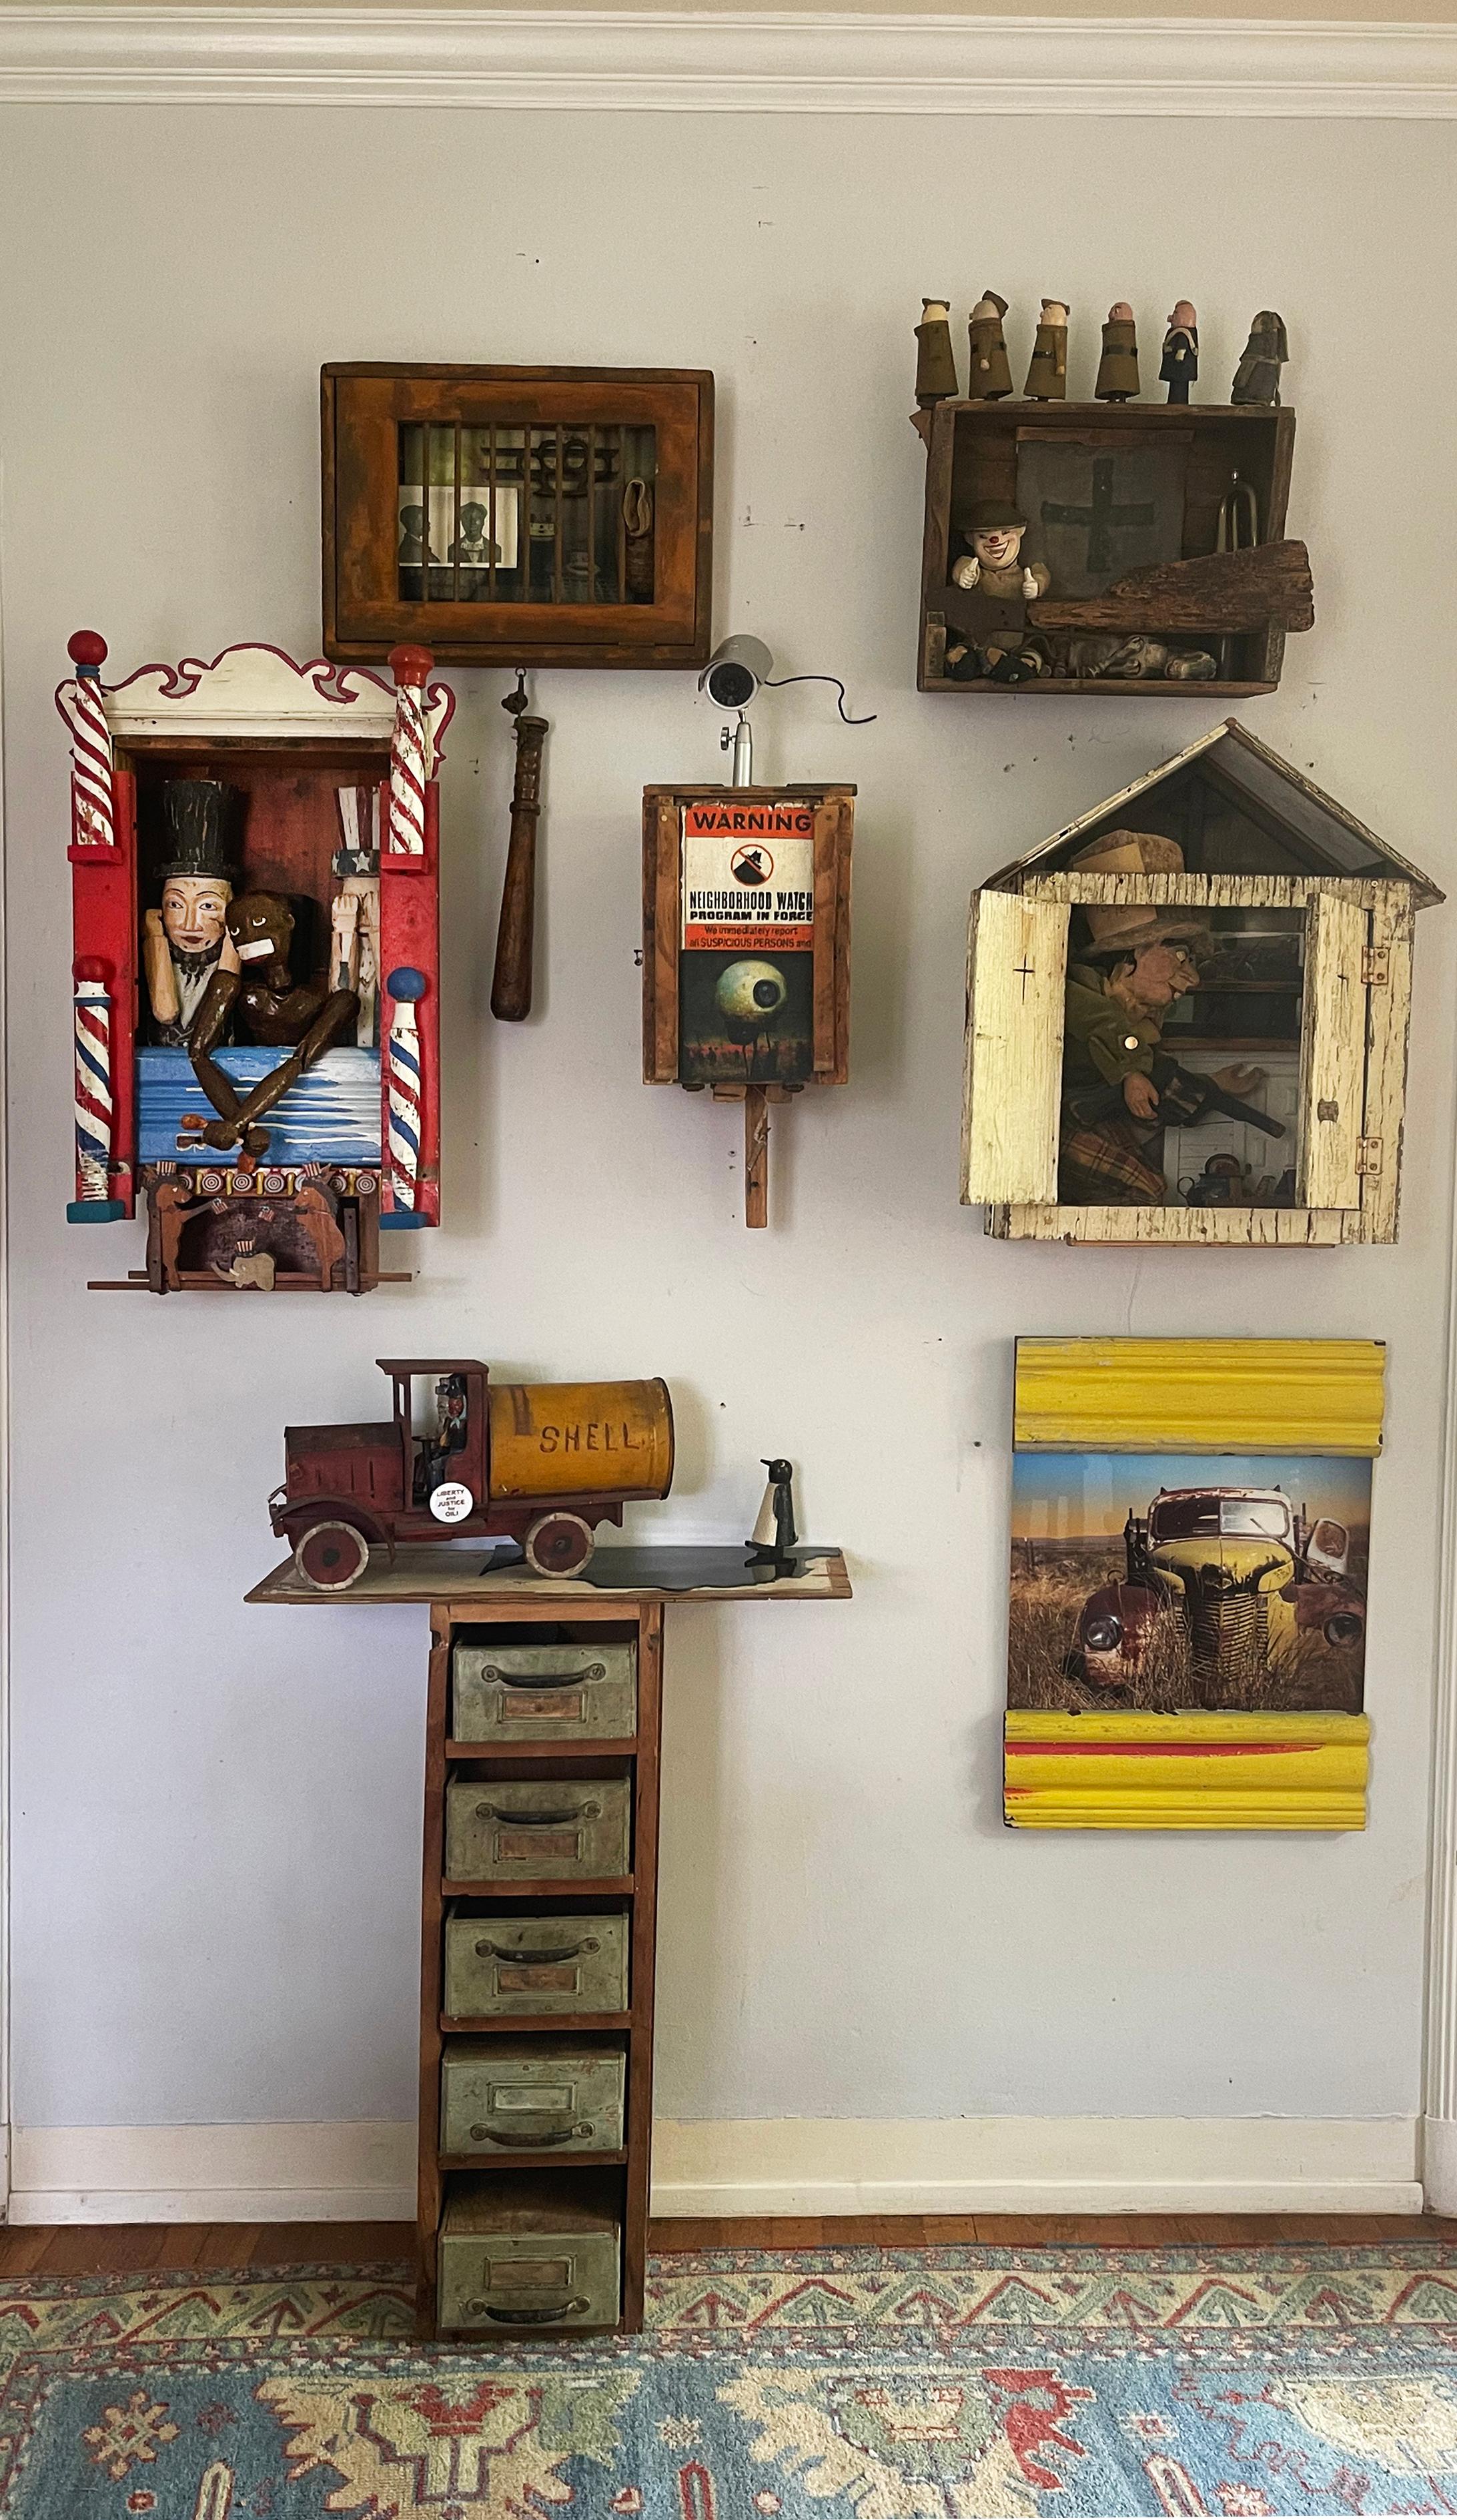 KAT FLYN is a self-taught assemblage artist working presently out of San Diego. She began her career as a costume designer in Southern California. Over the years she amassed a trove of artifacts and collectables which she began using to create